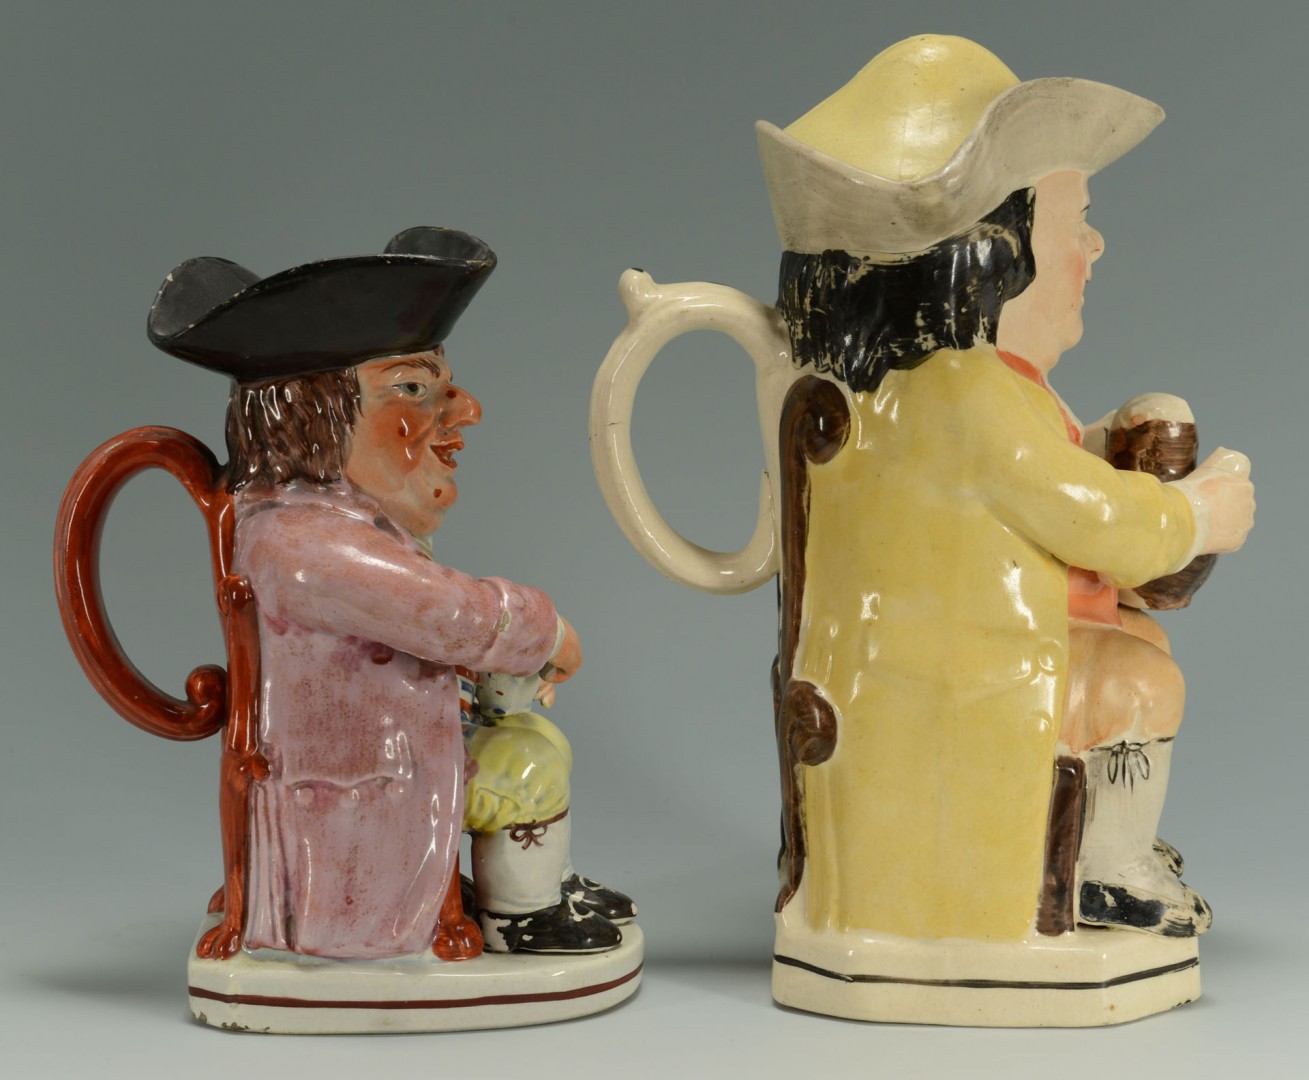 Lot 270: 2 Early Toby Jugs including The Sinner